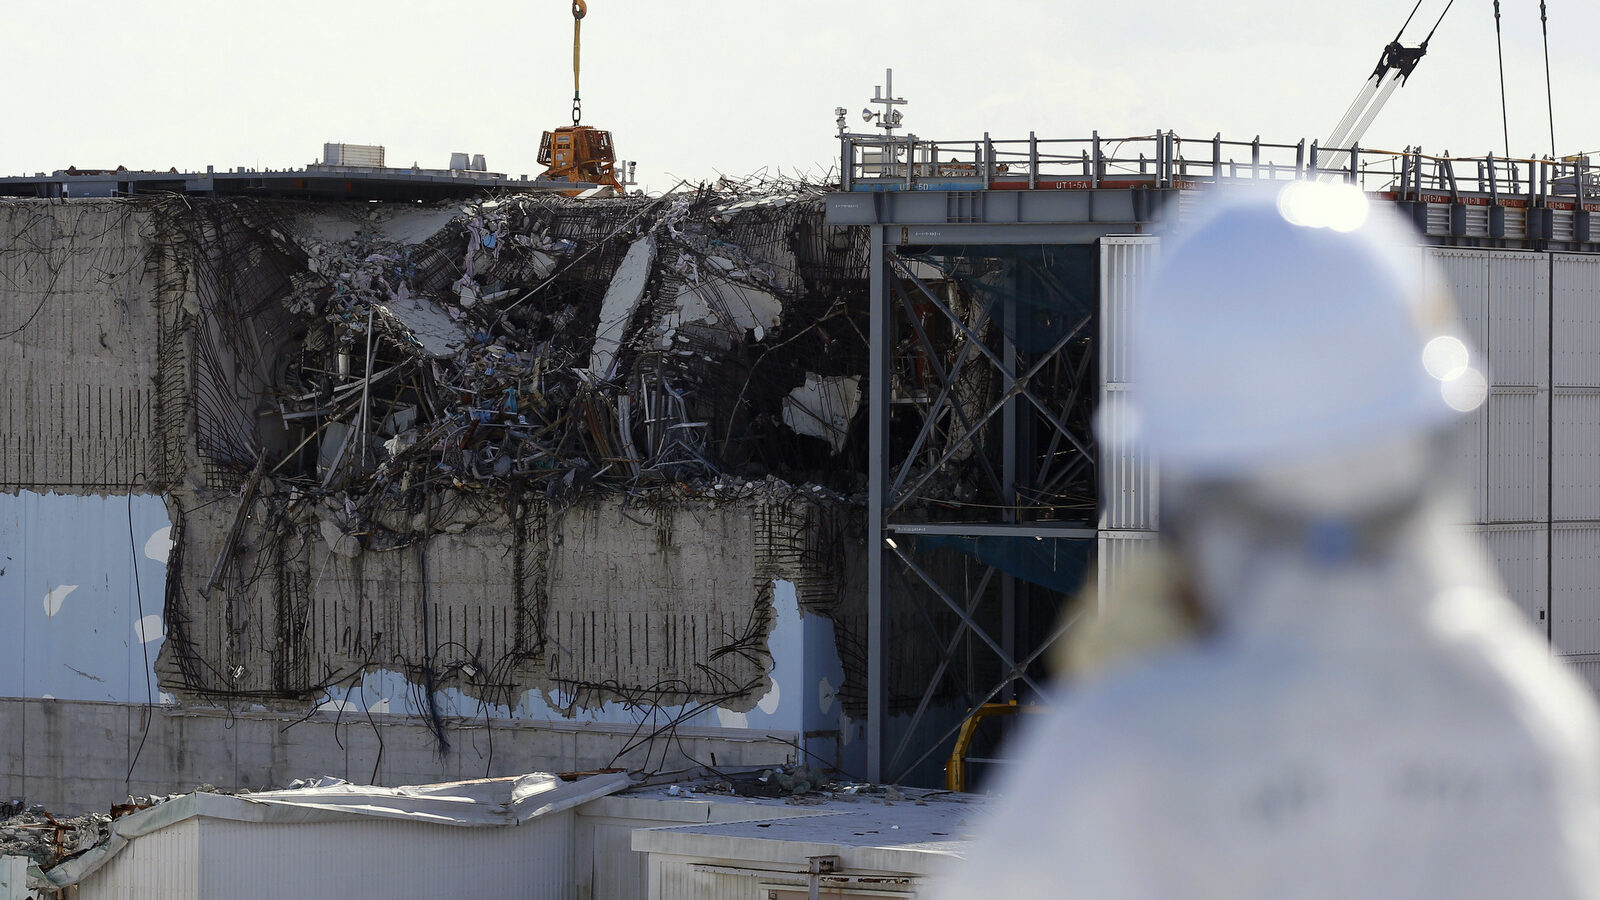 A member of the media tour group wearing a protective suit and a mask looks at the No. 3 reactor building at Tokyo Electric Power Co's (TEPCO) tsunami-crippled Fukushima Dai-ichi nuclear power plant in Okuma, Fukushima Prefecture, northeastern Japan, Wednesday, Feb. 10, 2016. (Toru Hanai/AP)